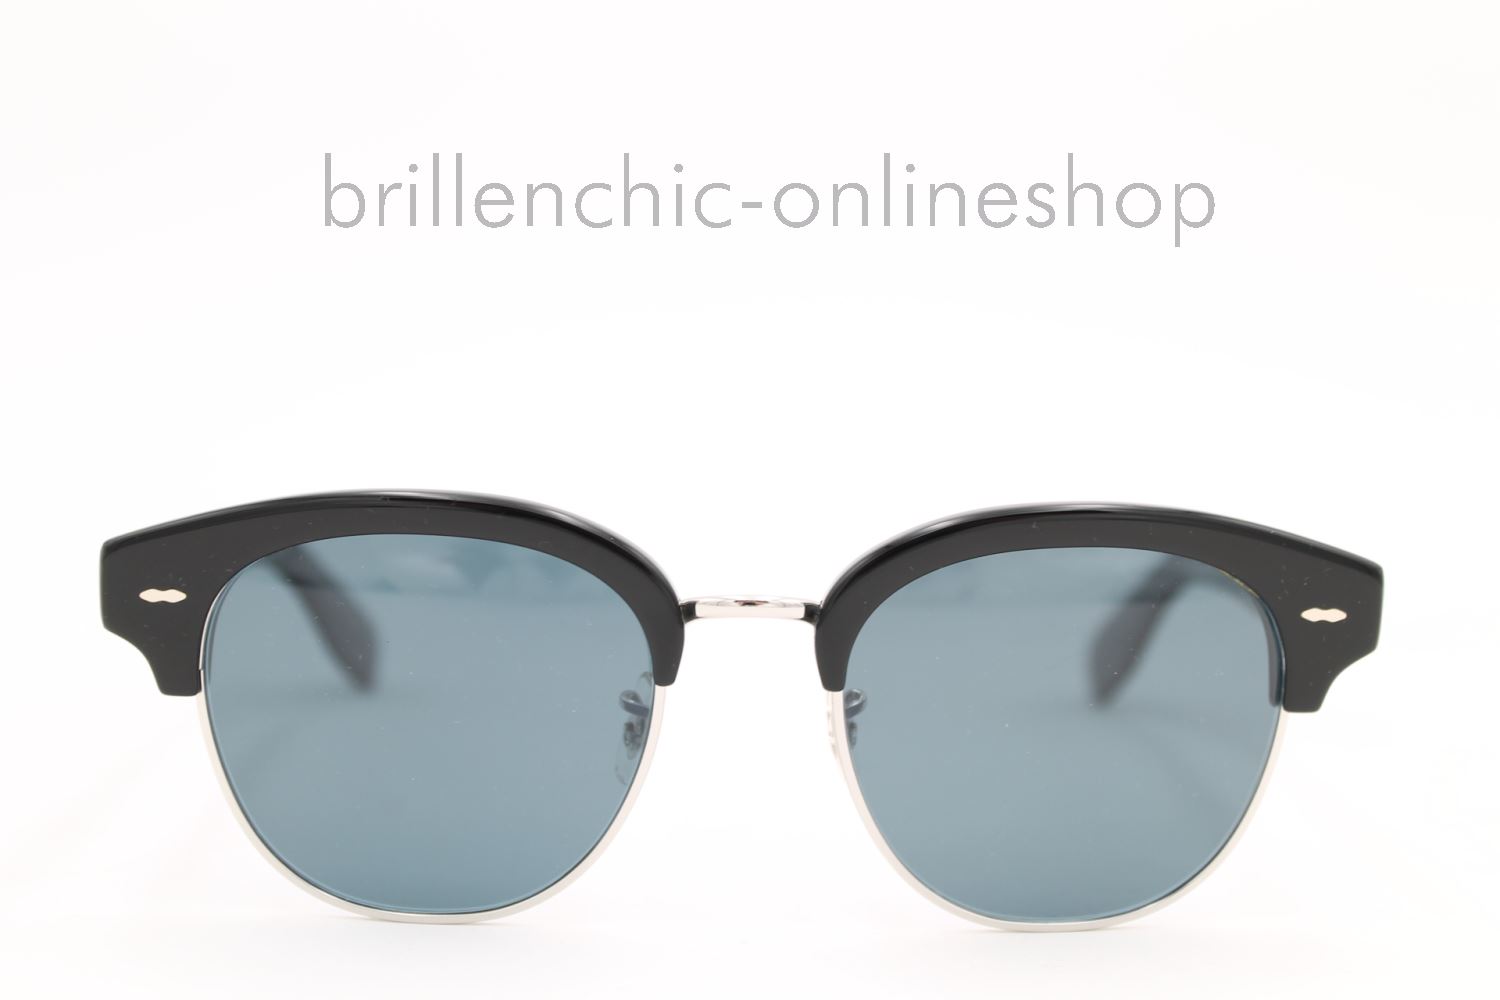 Brillenchic-onlineshop in Berlin - OLIVER PEOPLES CARY GRANT 2 SUN OV 5436S  5436 1005/3R - POLARIZED 